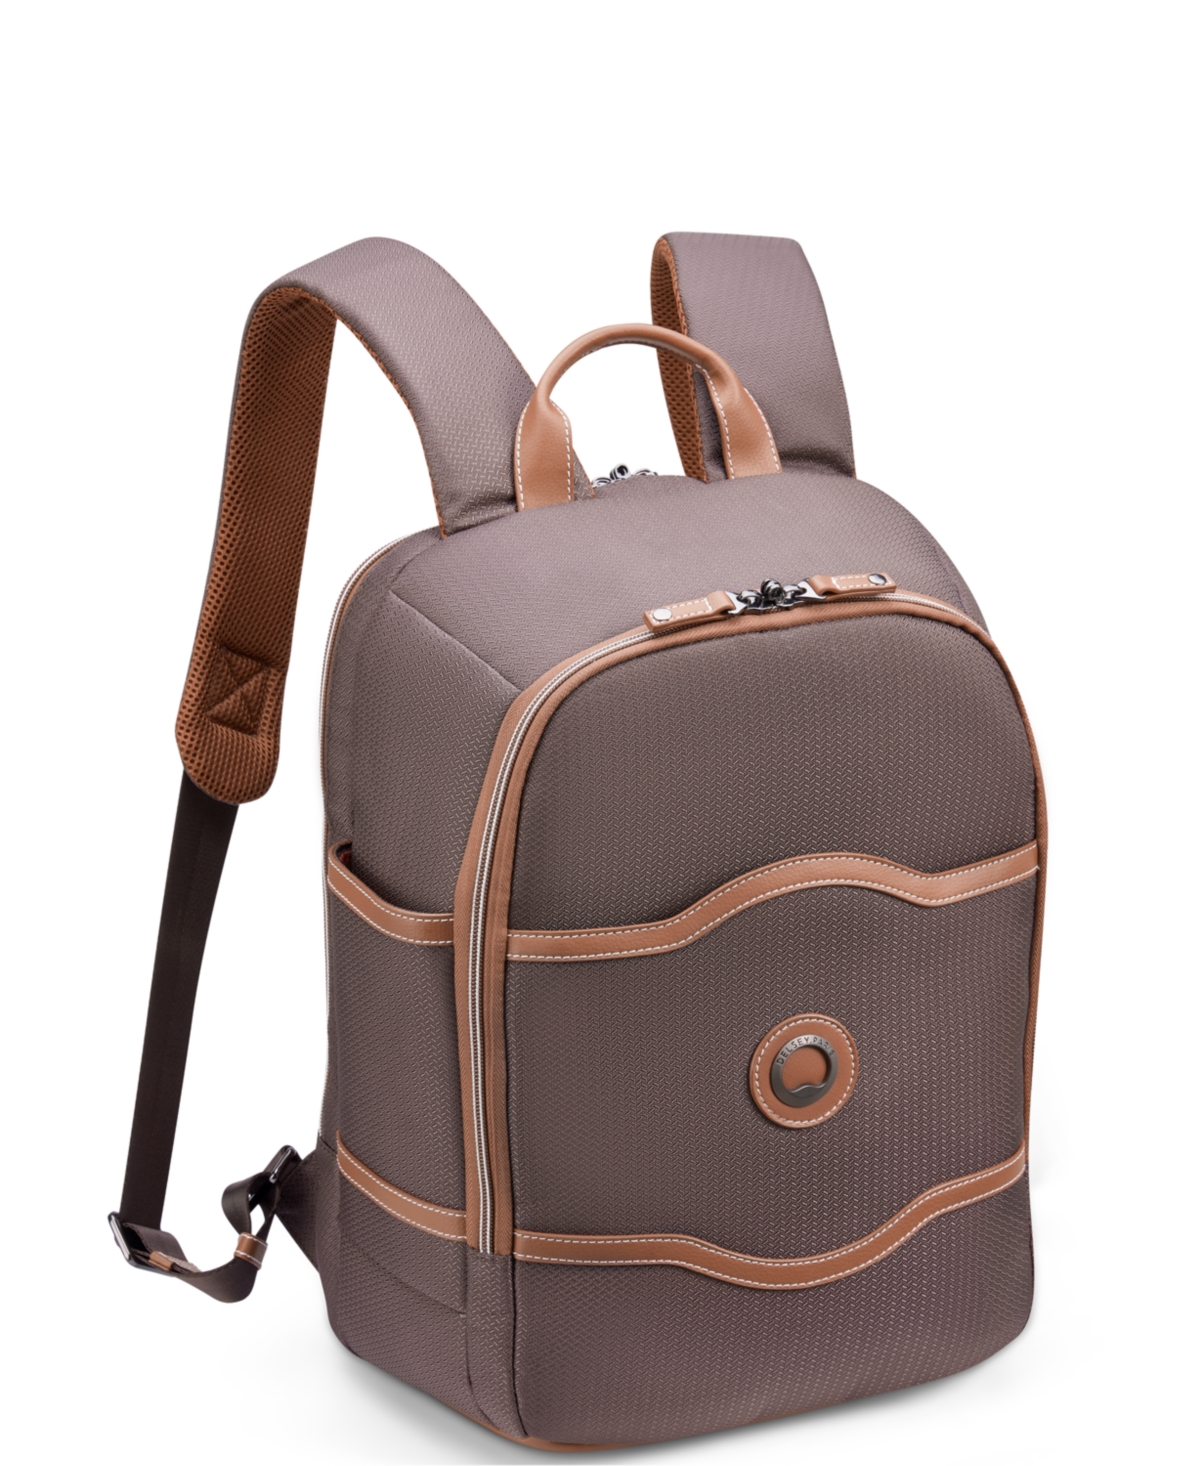 Chatelet Air 2.0 Backpack - Chocolate